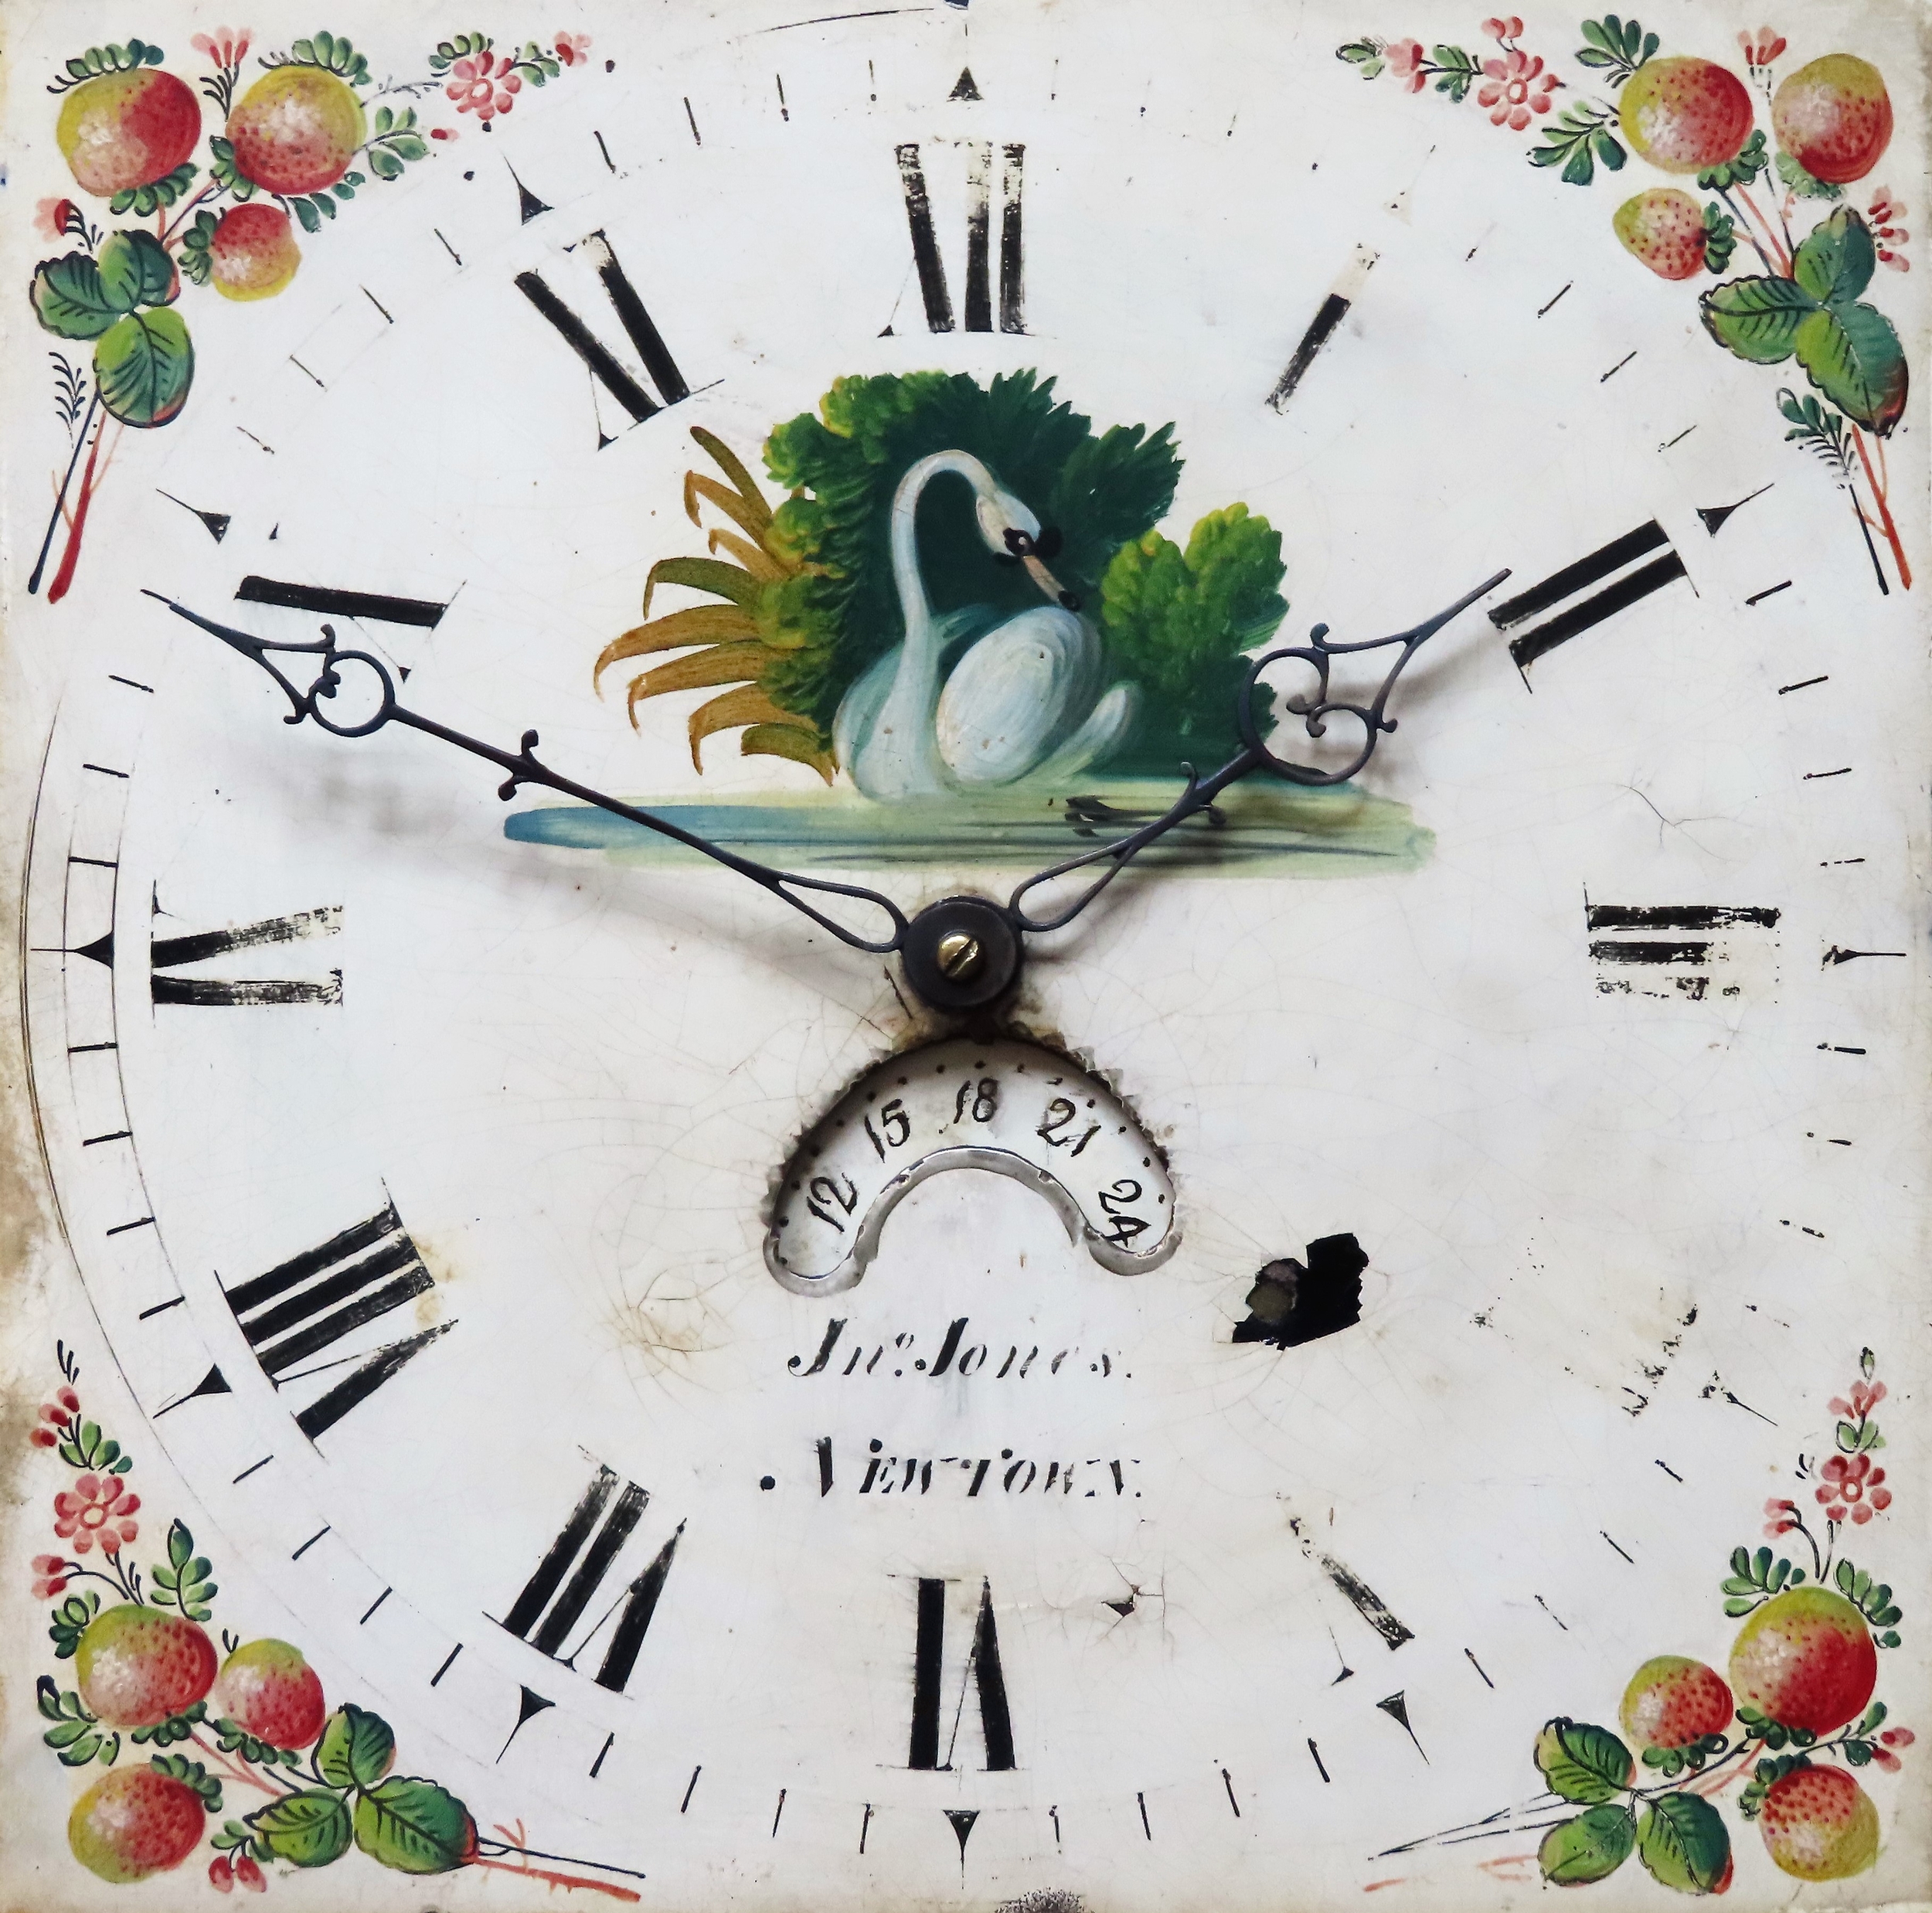 Oak & Mahogany cased longcase clock with hand painted and enamelled dial, by John Jones, Newtown. - Image 2 of 3